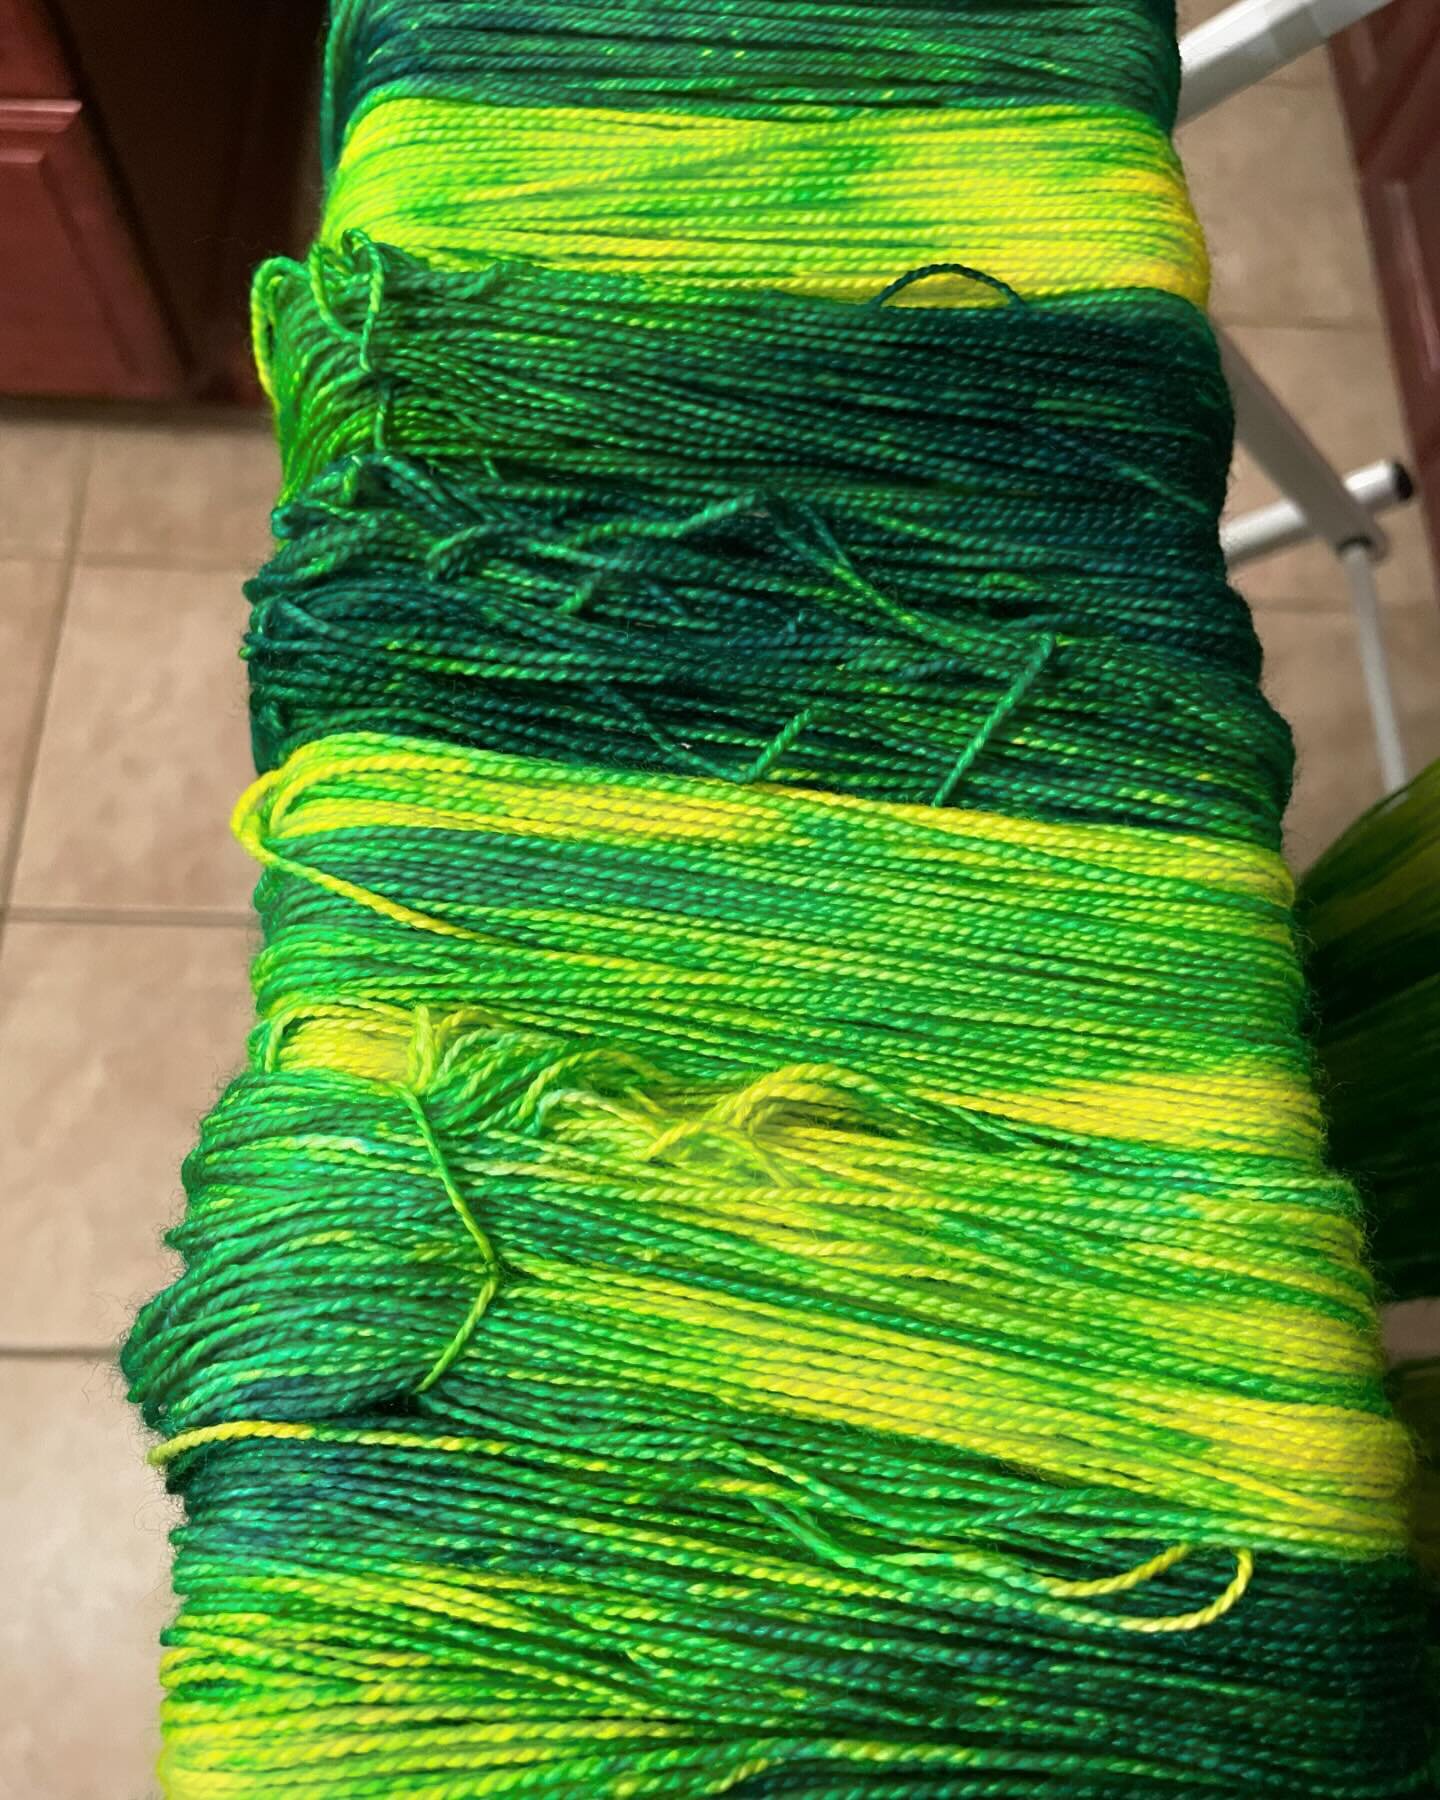 It&rsquo;s the first full day of Spring!  Shamrock is on the drying rack today&mdash;I&rsquo;m pretty proud of how this batch came out! #spring #shamrock #green #yellow #handdyedyarn